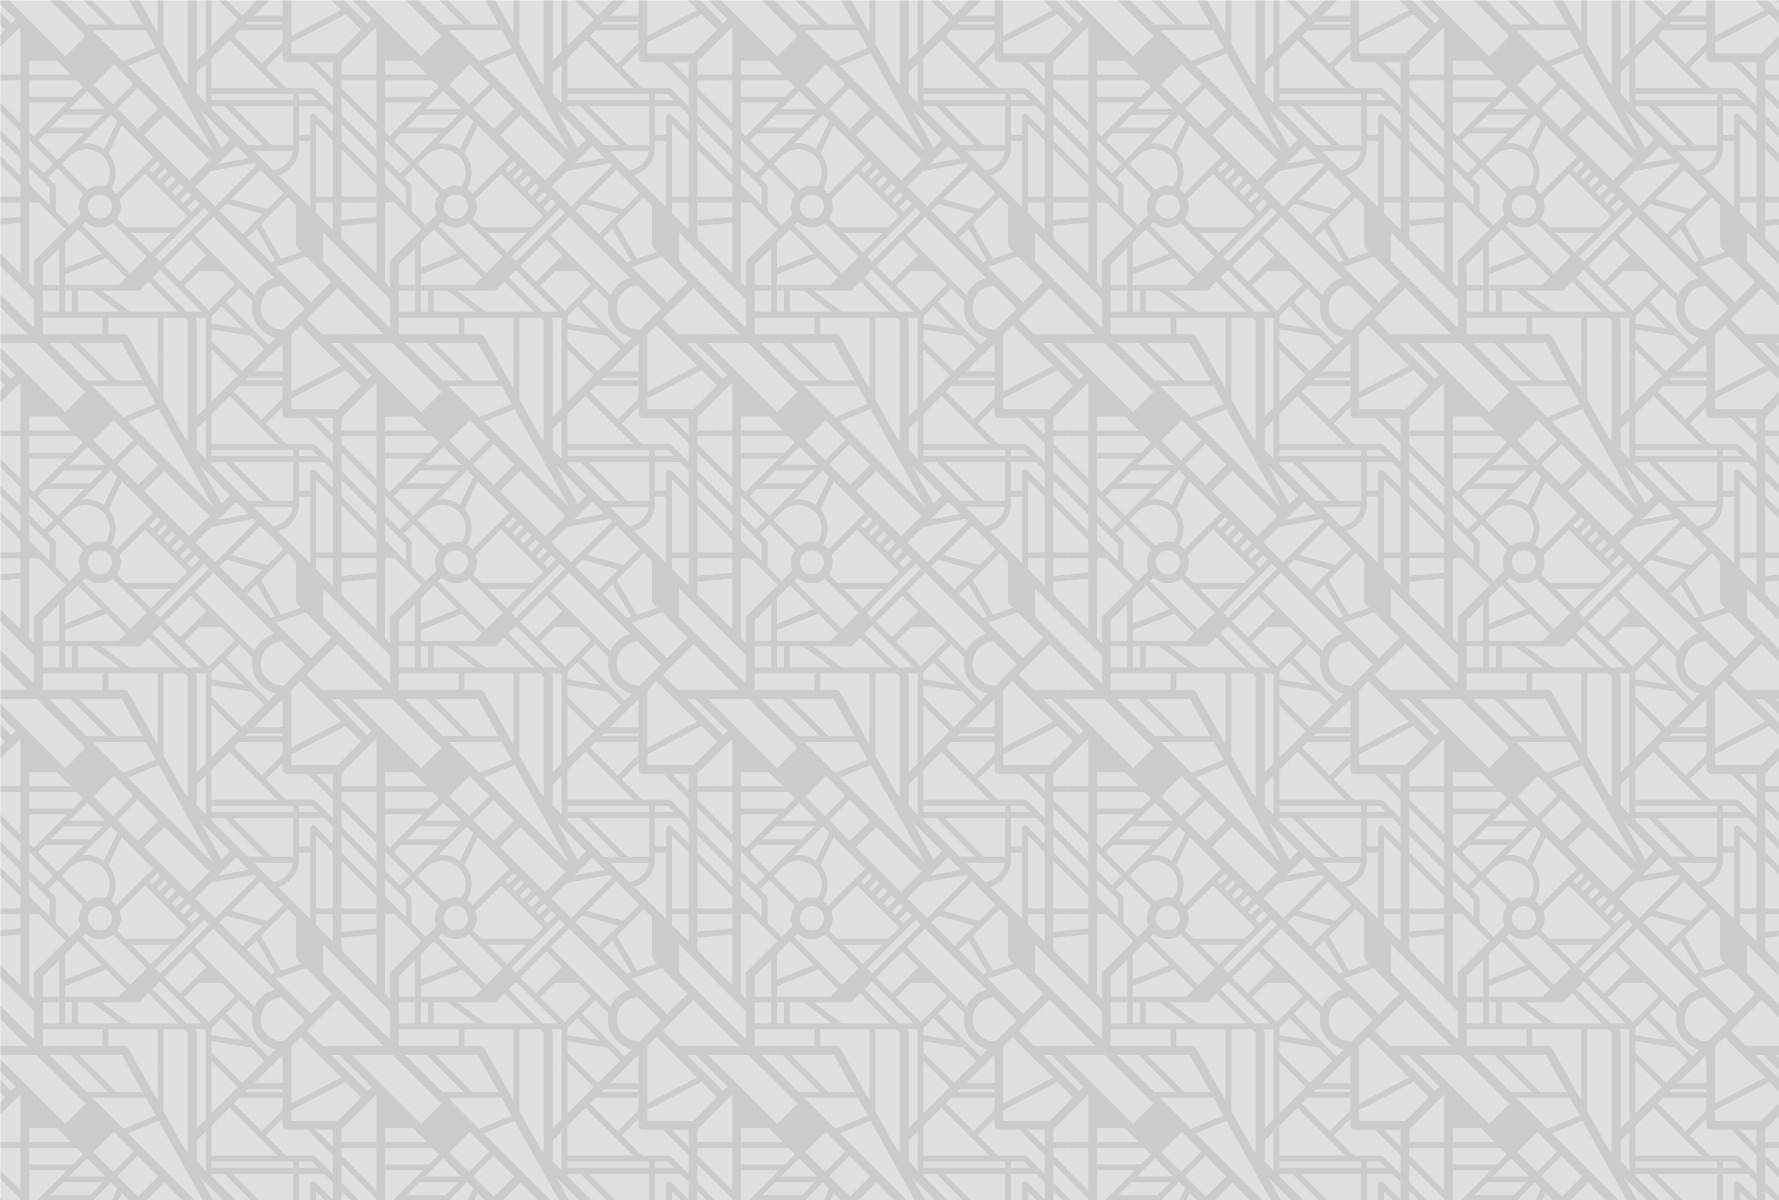 Geometric wallpaper  Graphic patterns  Abstract shapes